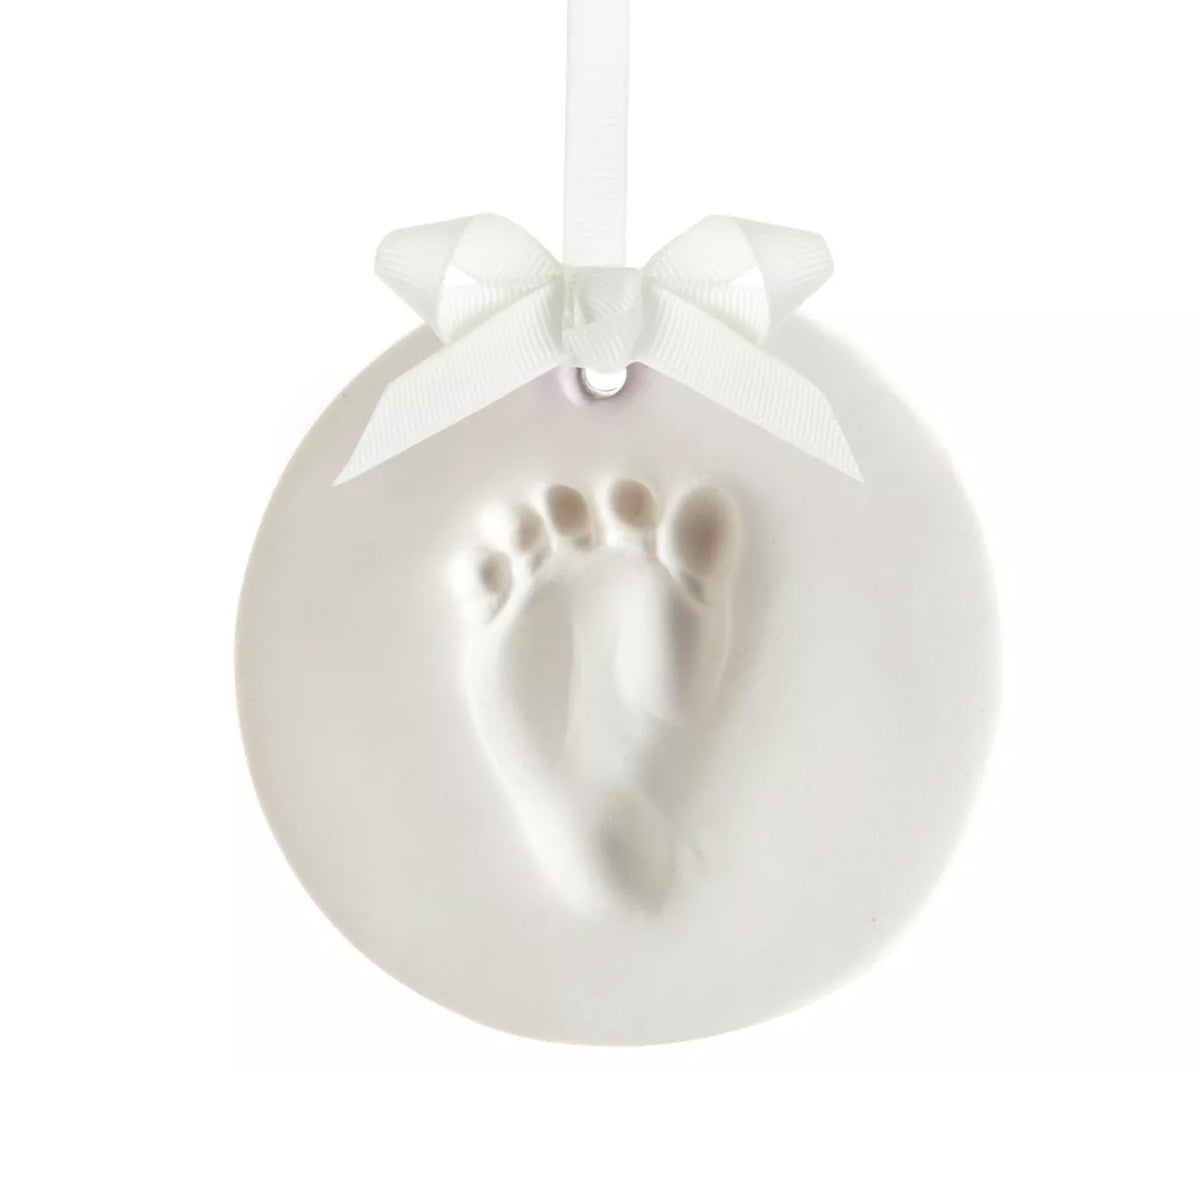 Clay Baby Hand & Foot Impression Moulding Kit - White